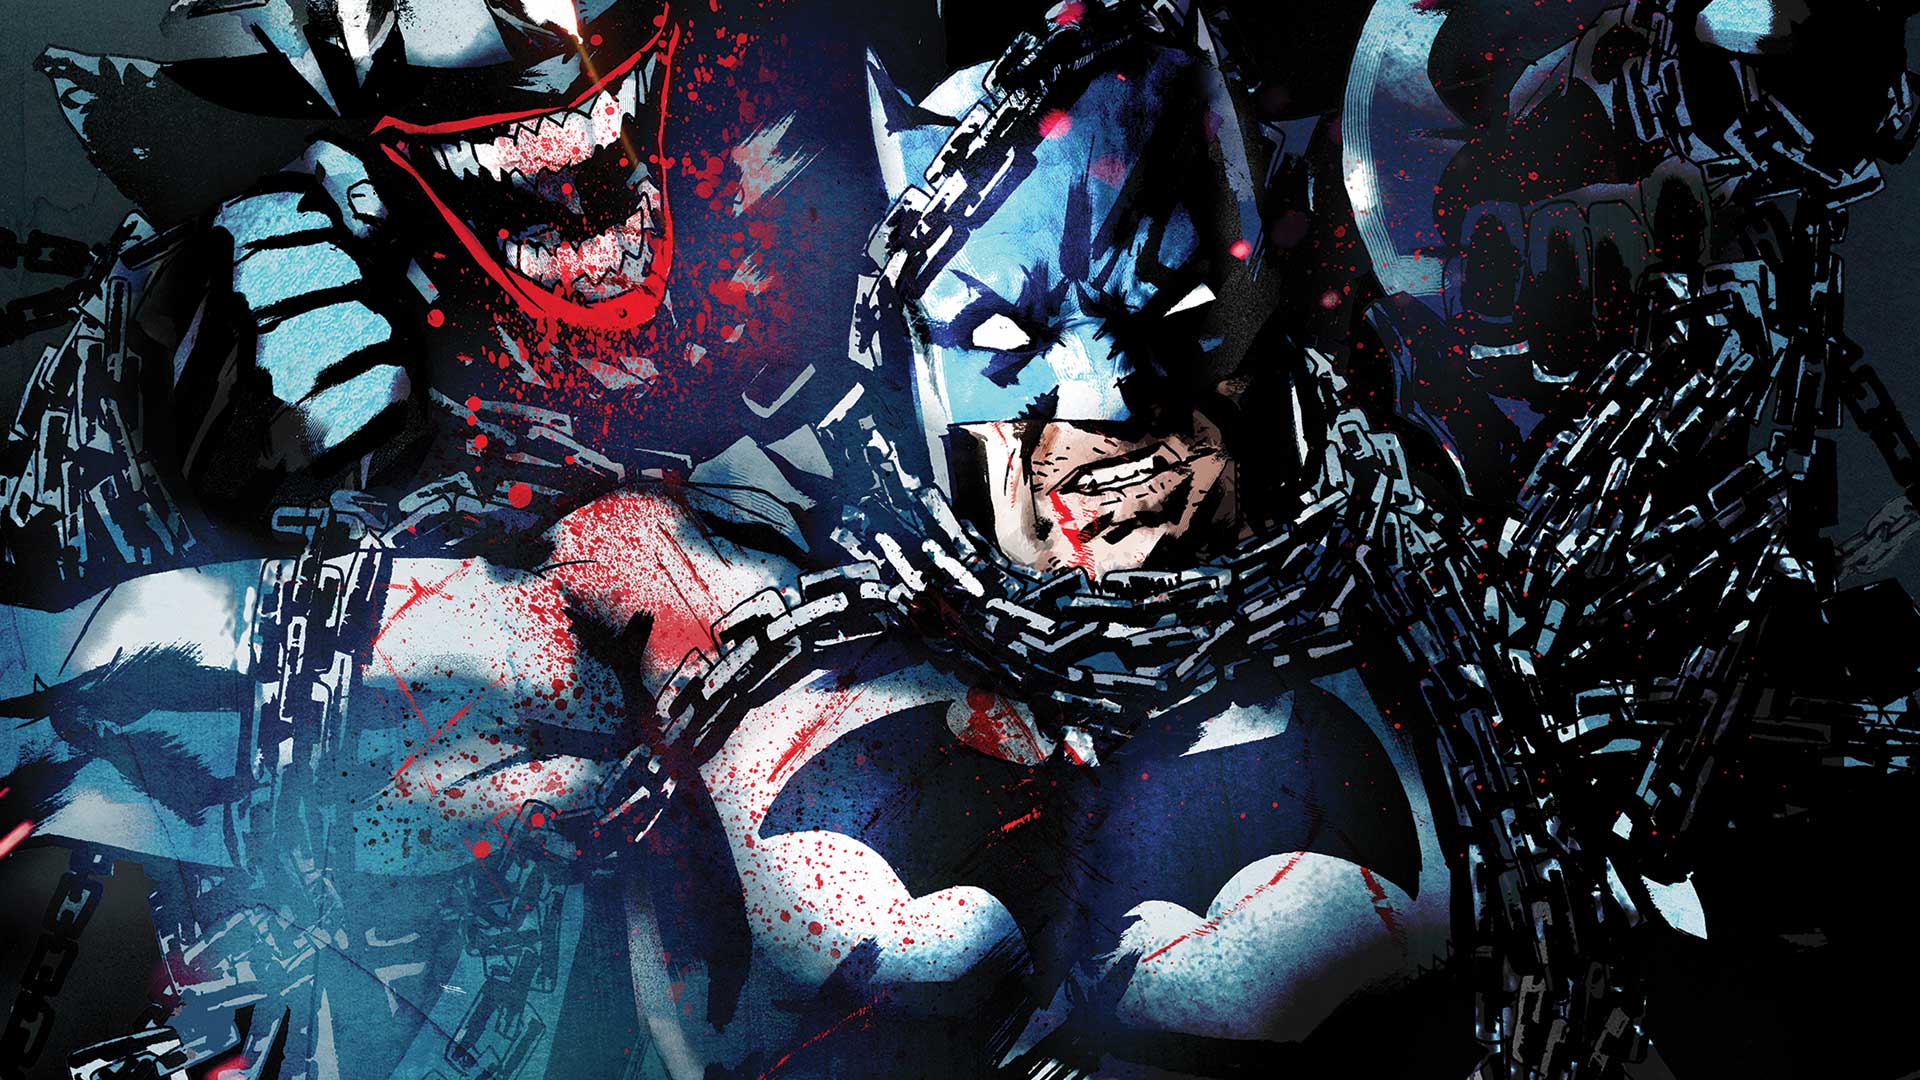 The Batman Who Laughs: Structure, Trauma and Losing Control